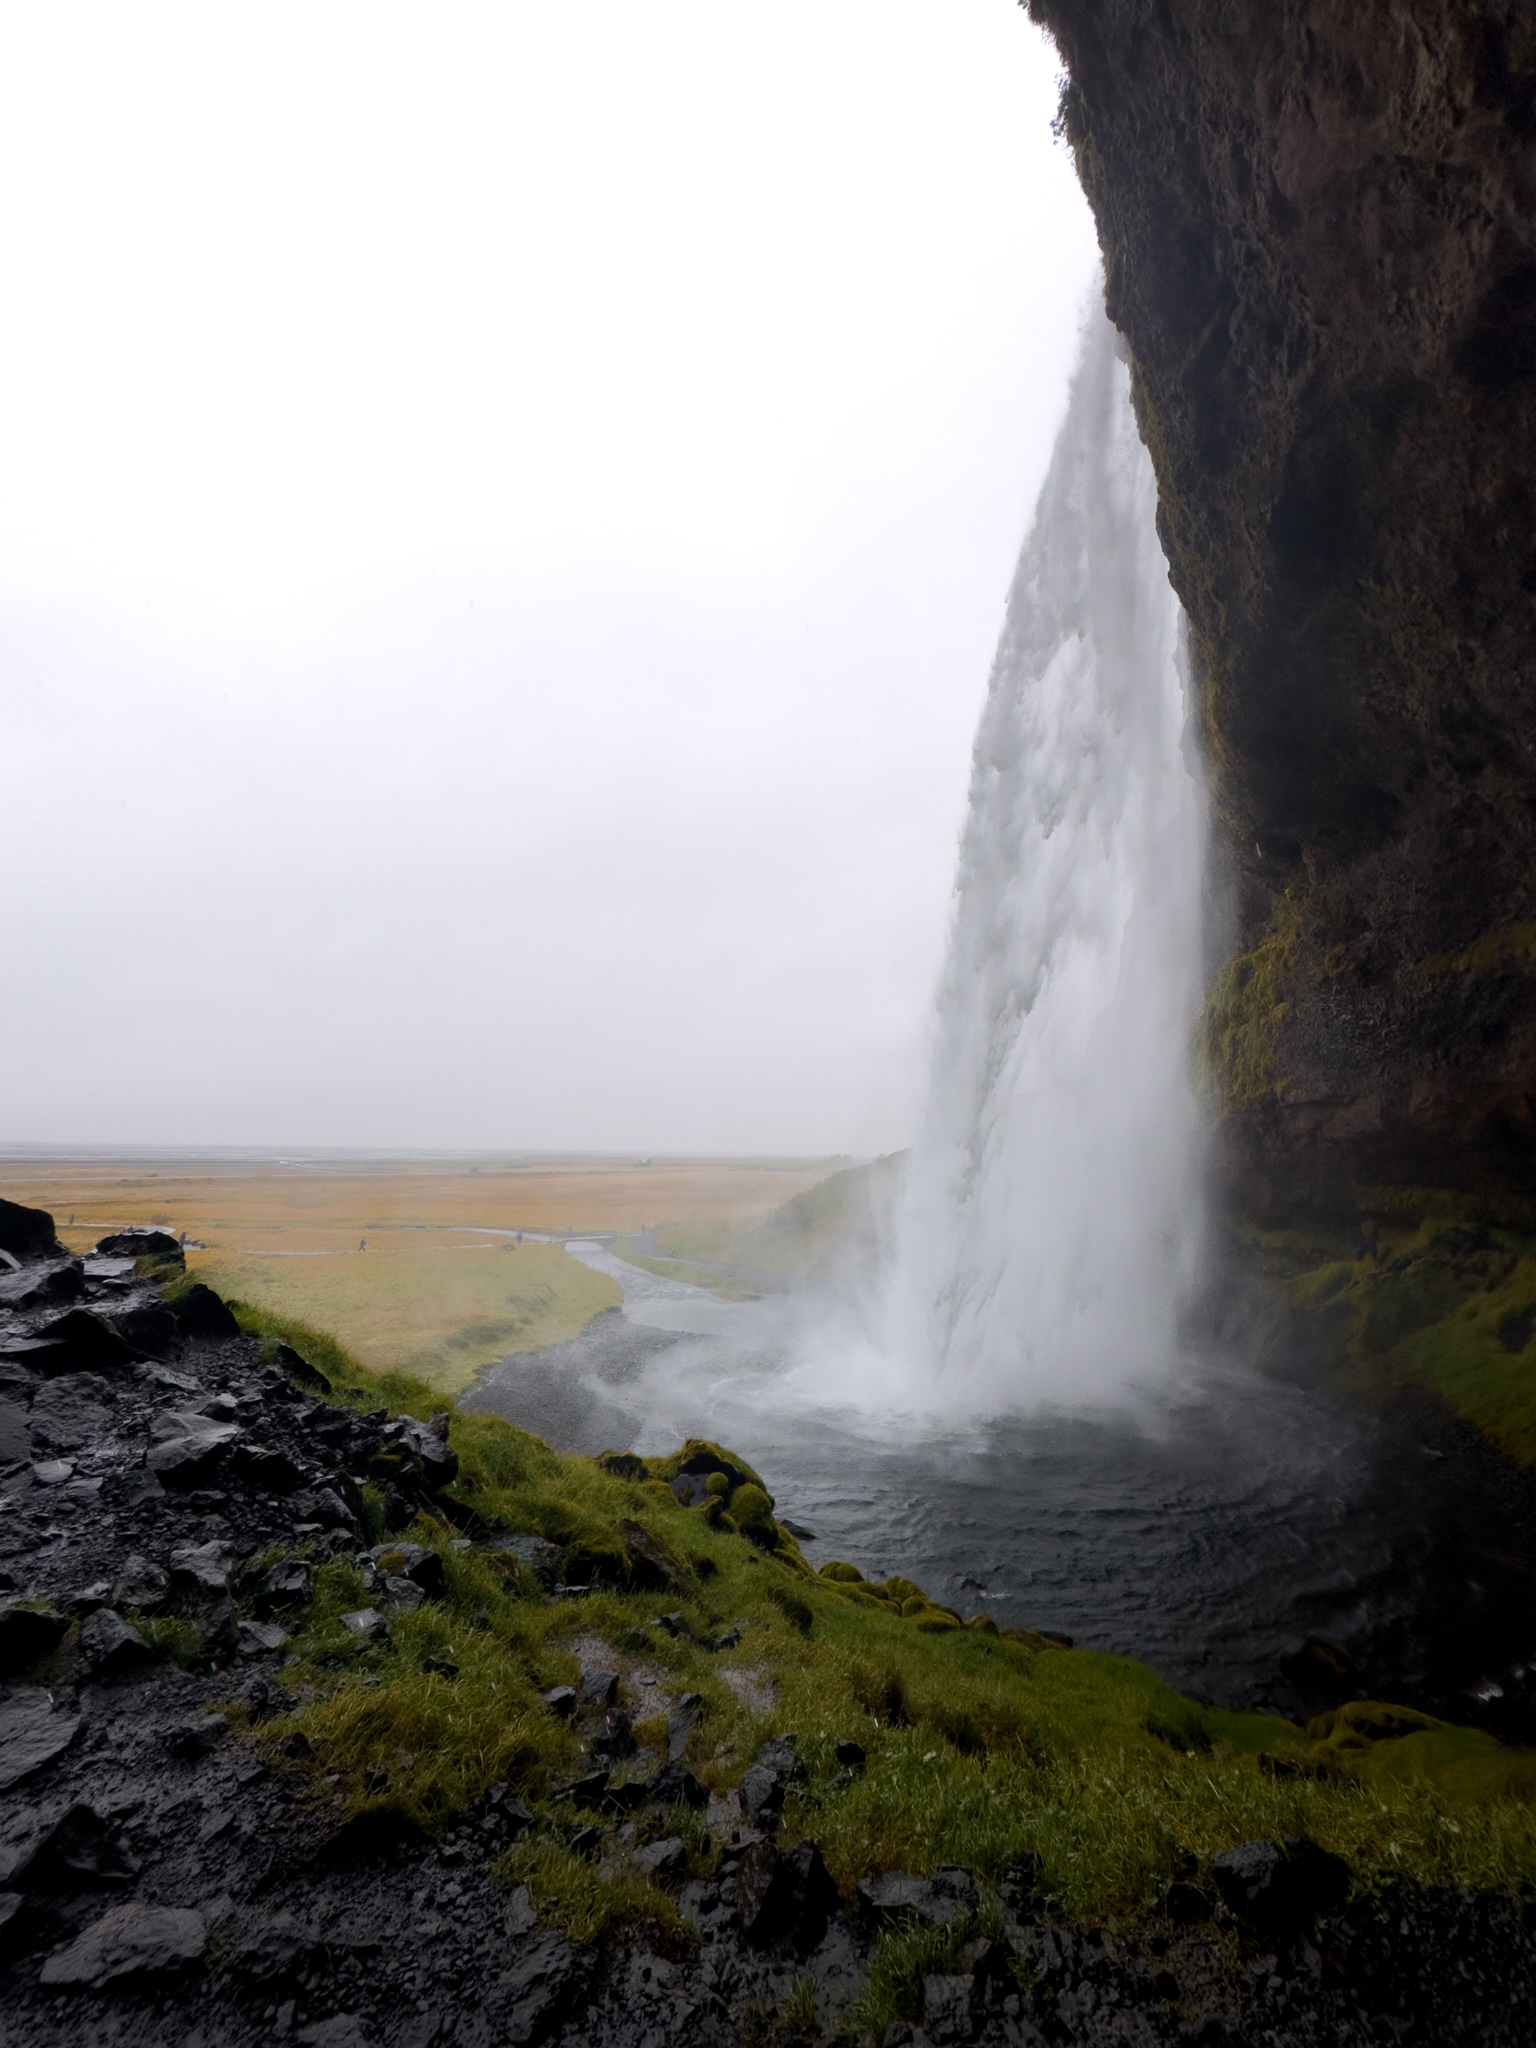 Seljalandsfoss (waterfall) showers down from slightly behind the water in a cave like clearing where you can walk behind the waterfall